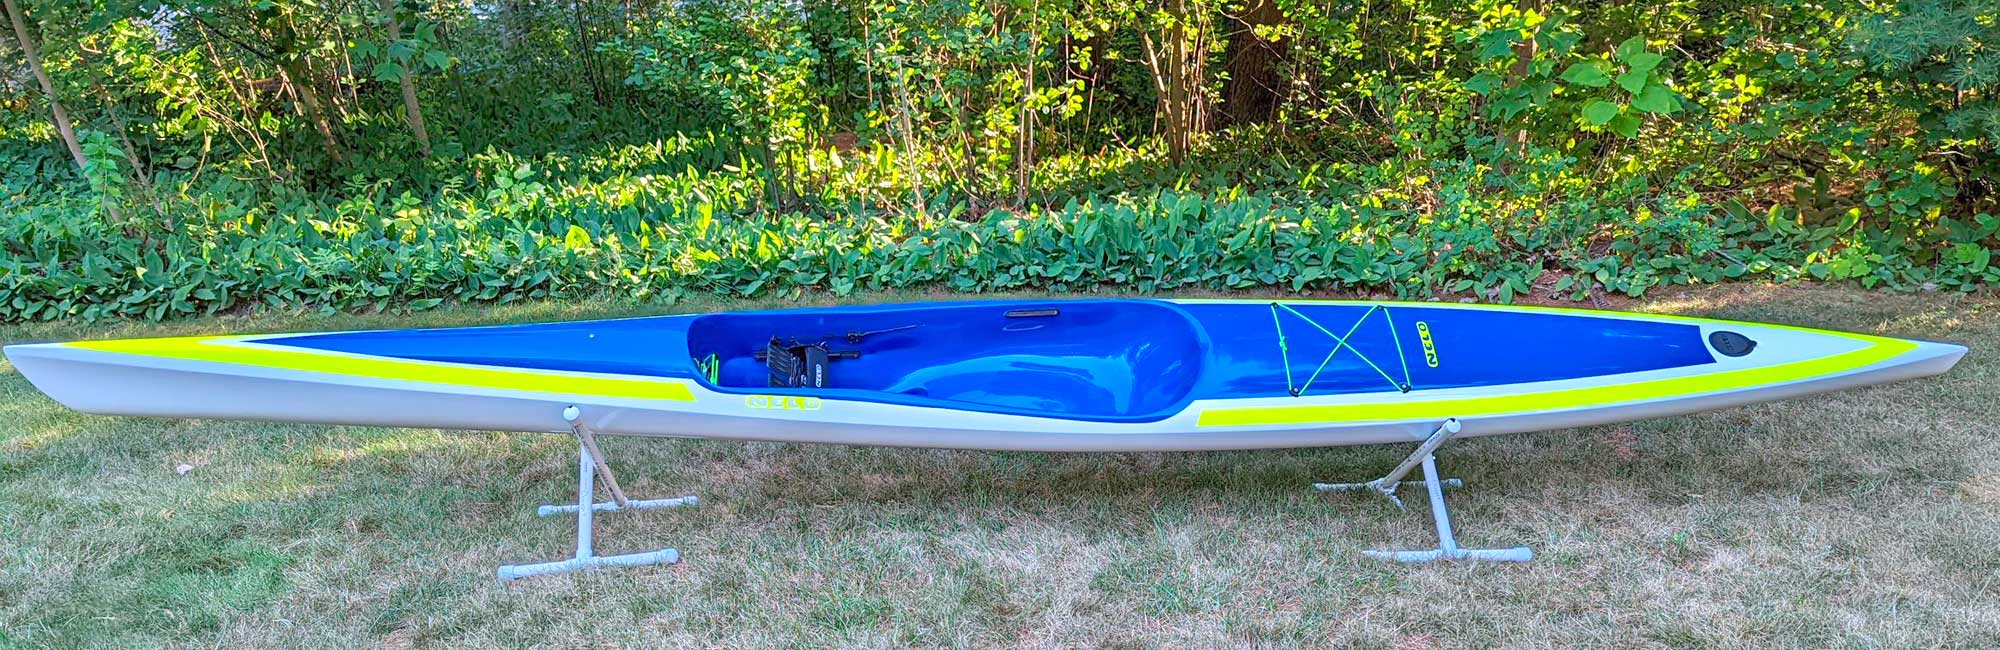 Nelo 540 XXL price and for sale